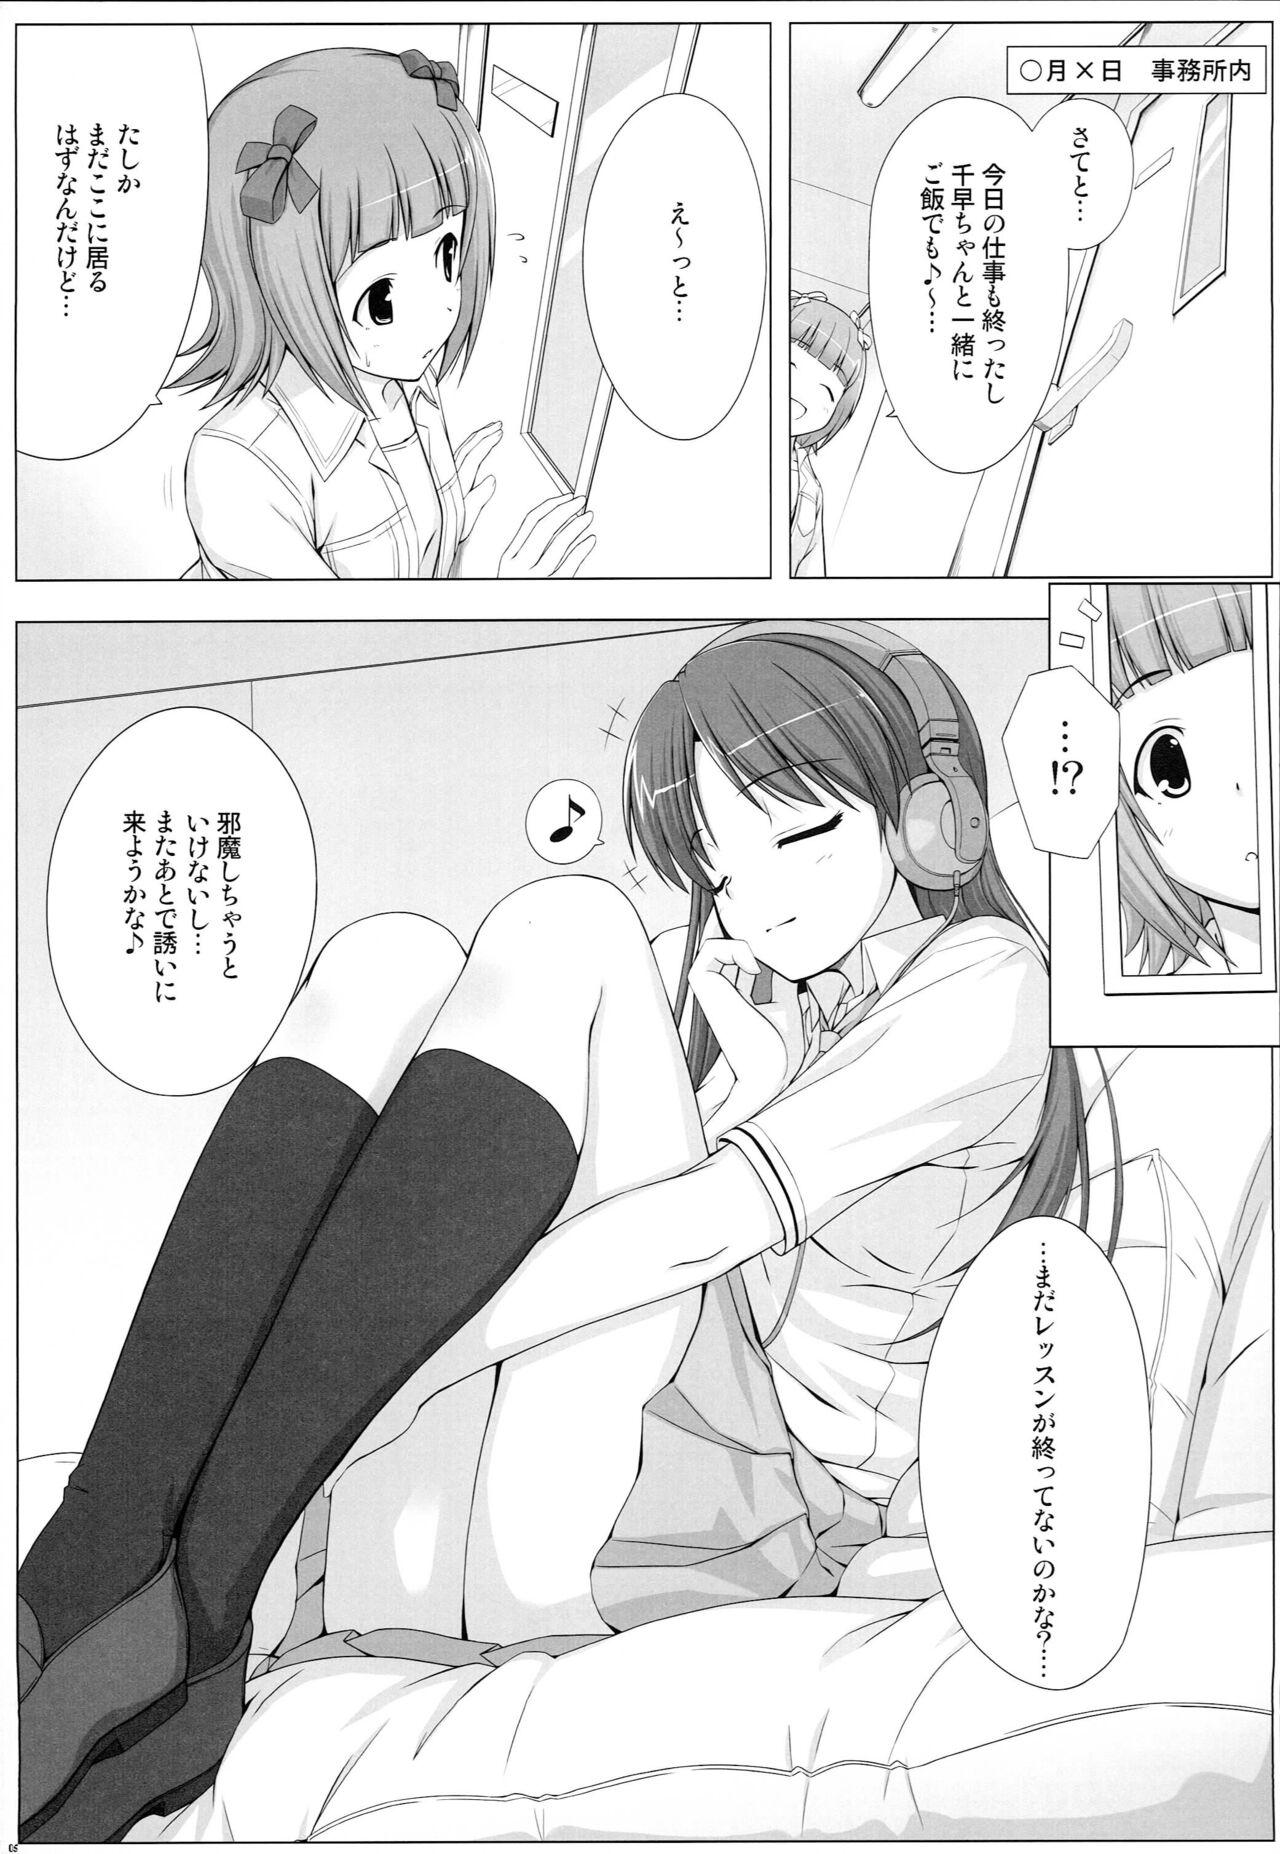 Pounding BAD COMMUNICATION? 09 - The idolmaster Parties - Page 4